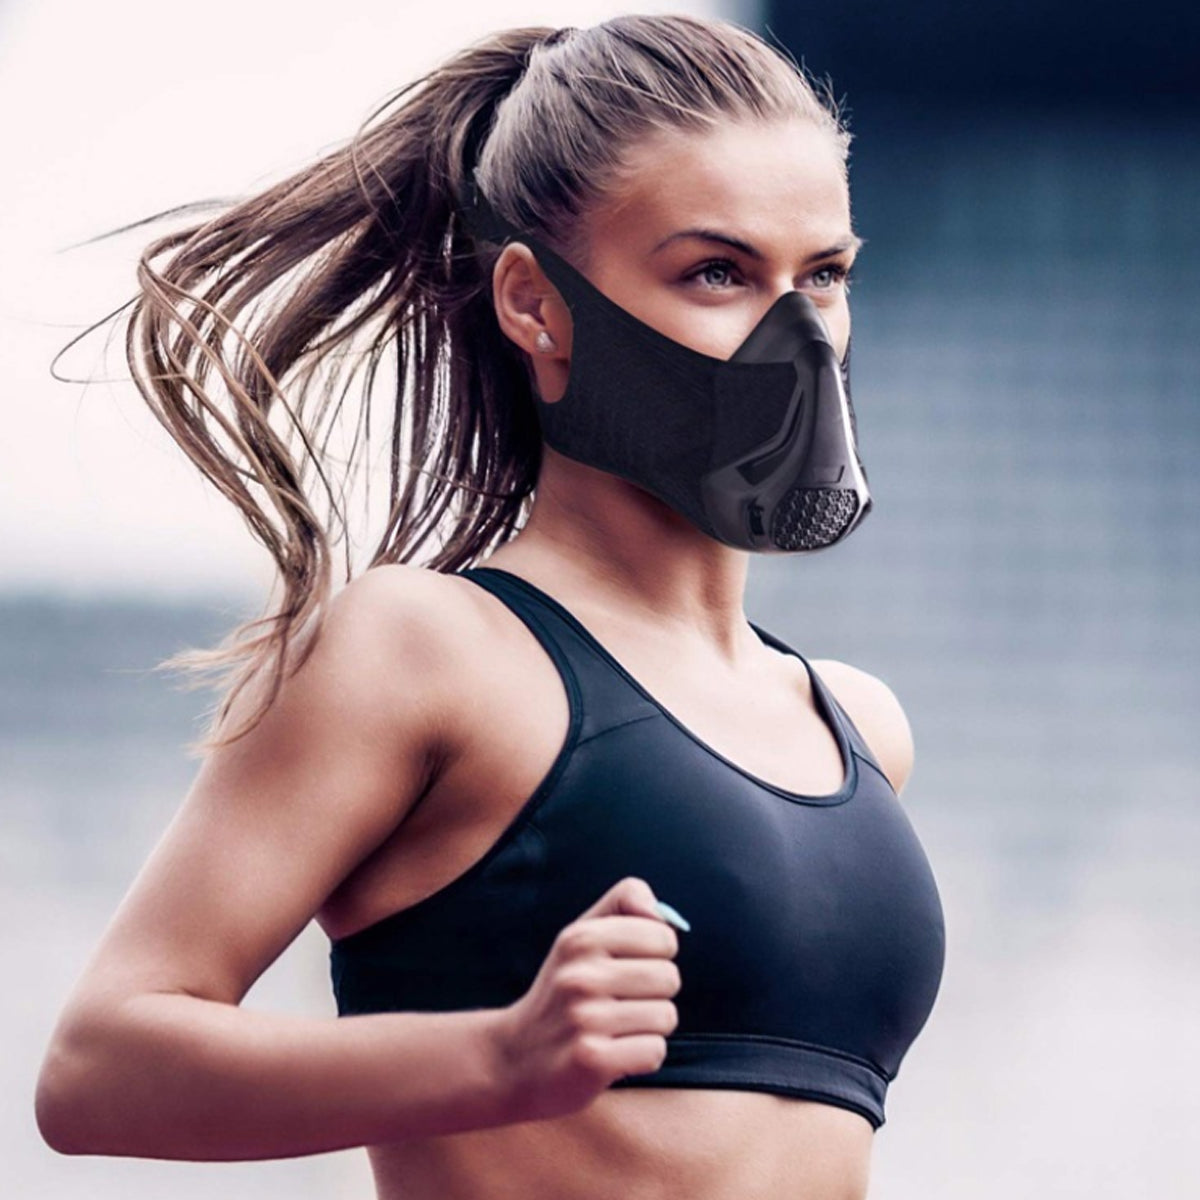 Elevation Resistance Training Cardio Workout Sports Mask With 24 levels by VistaShops